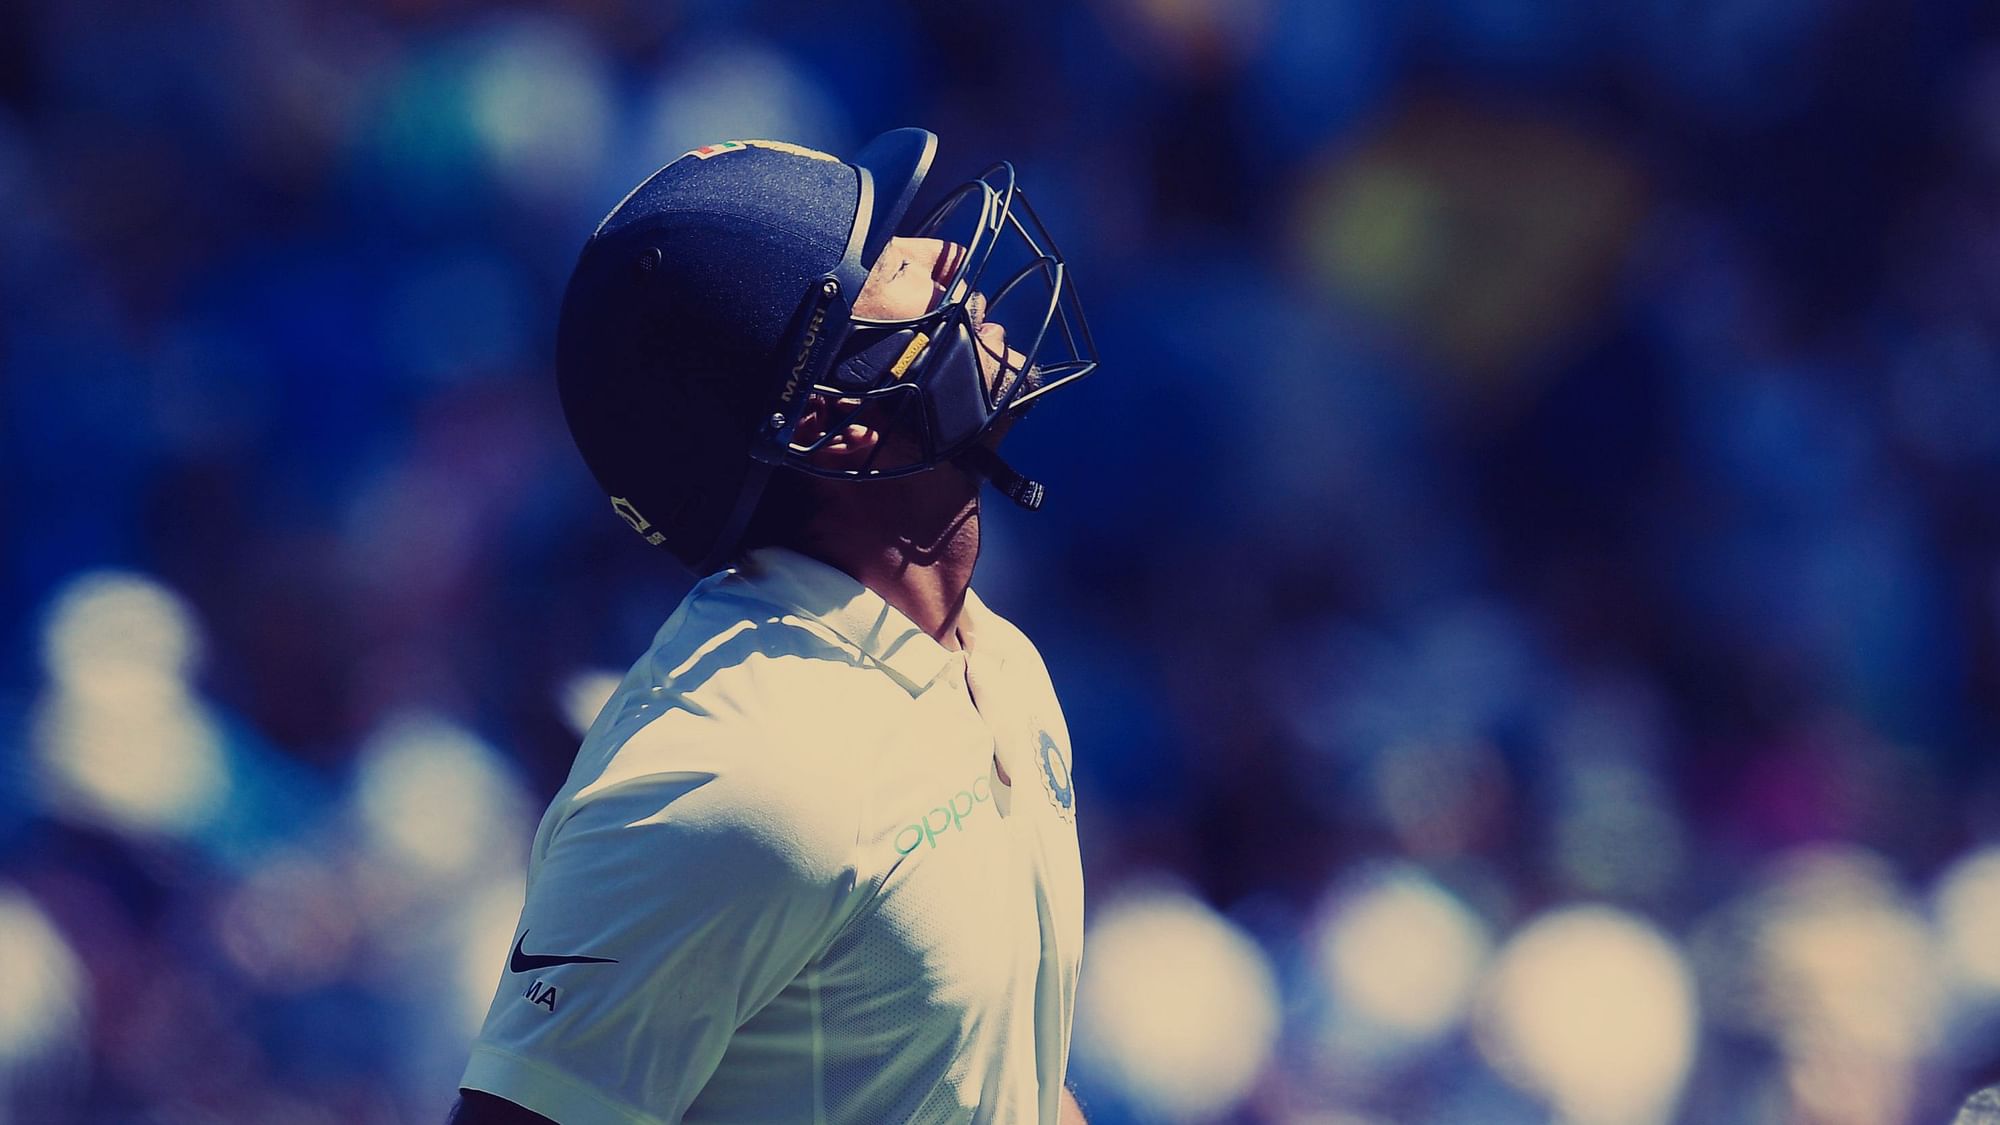 Mayank Agarwal scored a solid 76 against Australia on Day 1 of the Boxing Day Test.